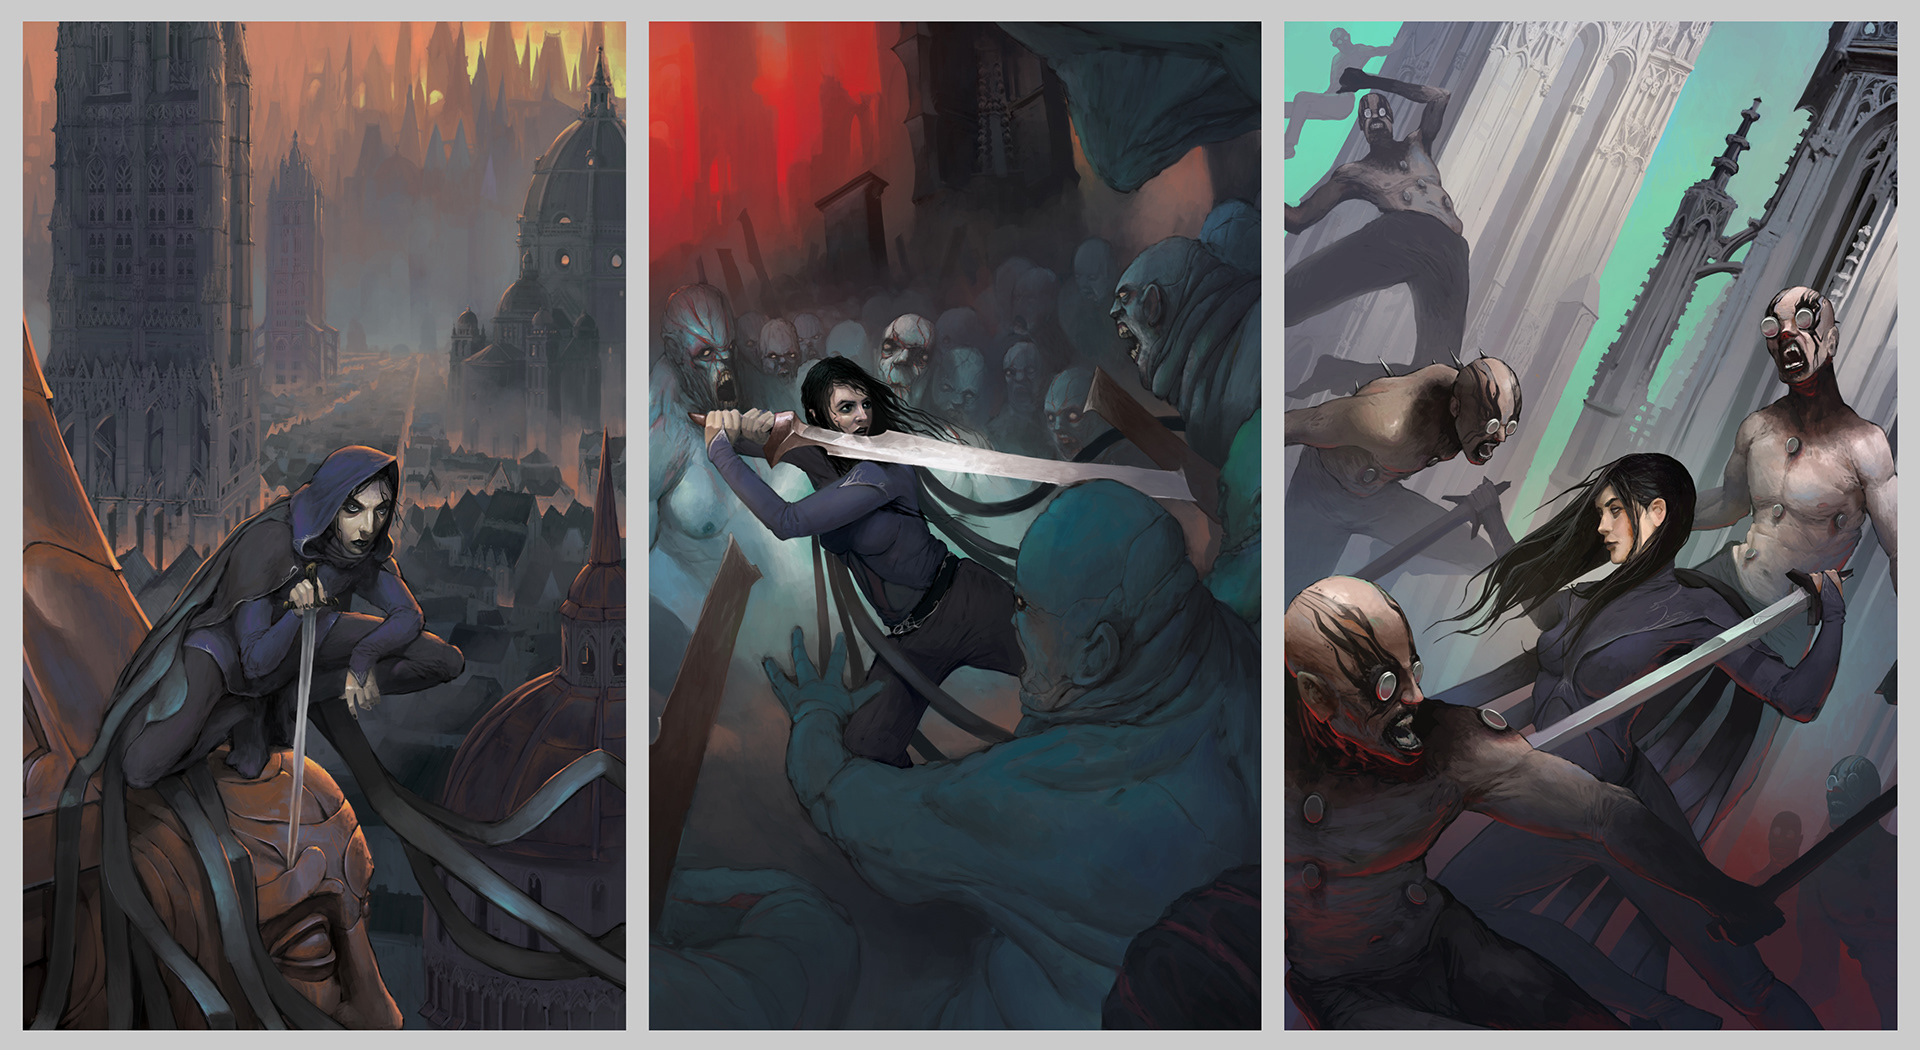 Mistborn Trilogy Covers on Behance